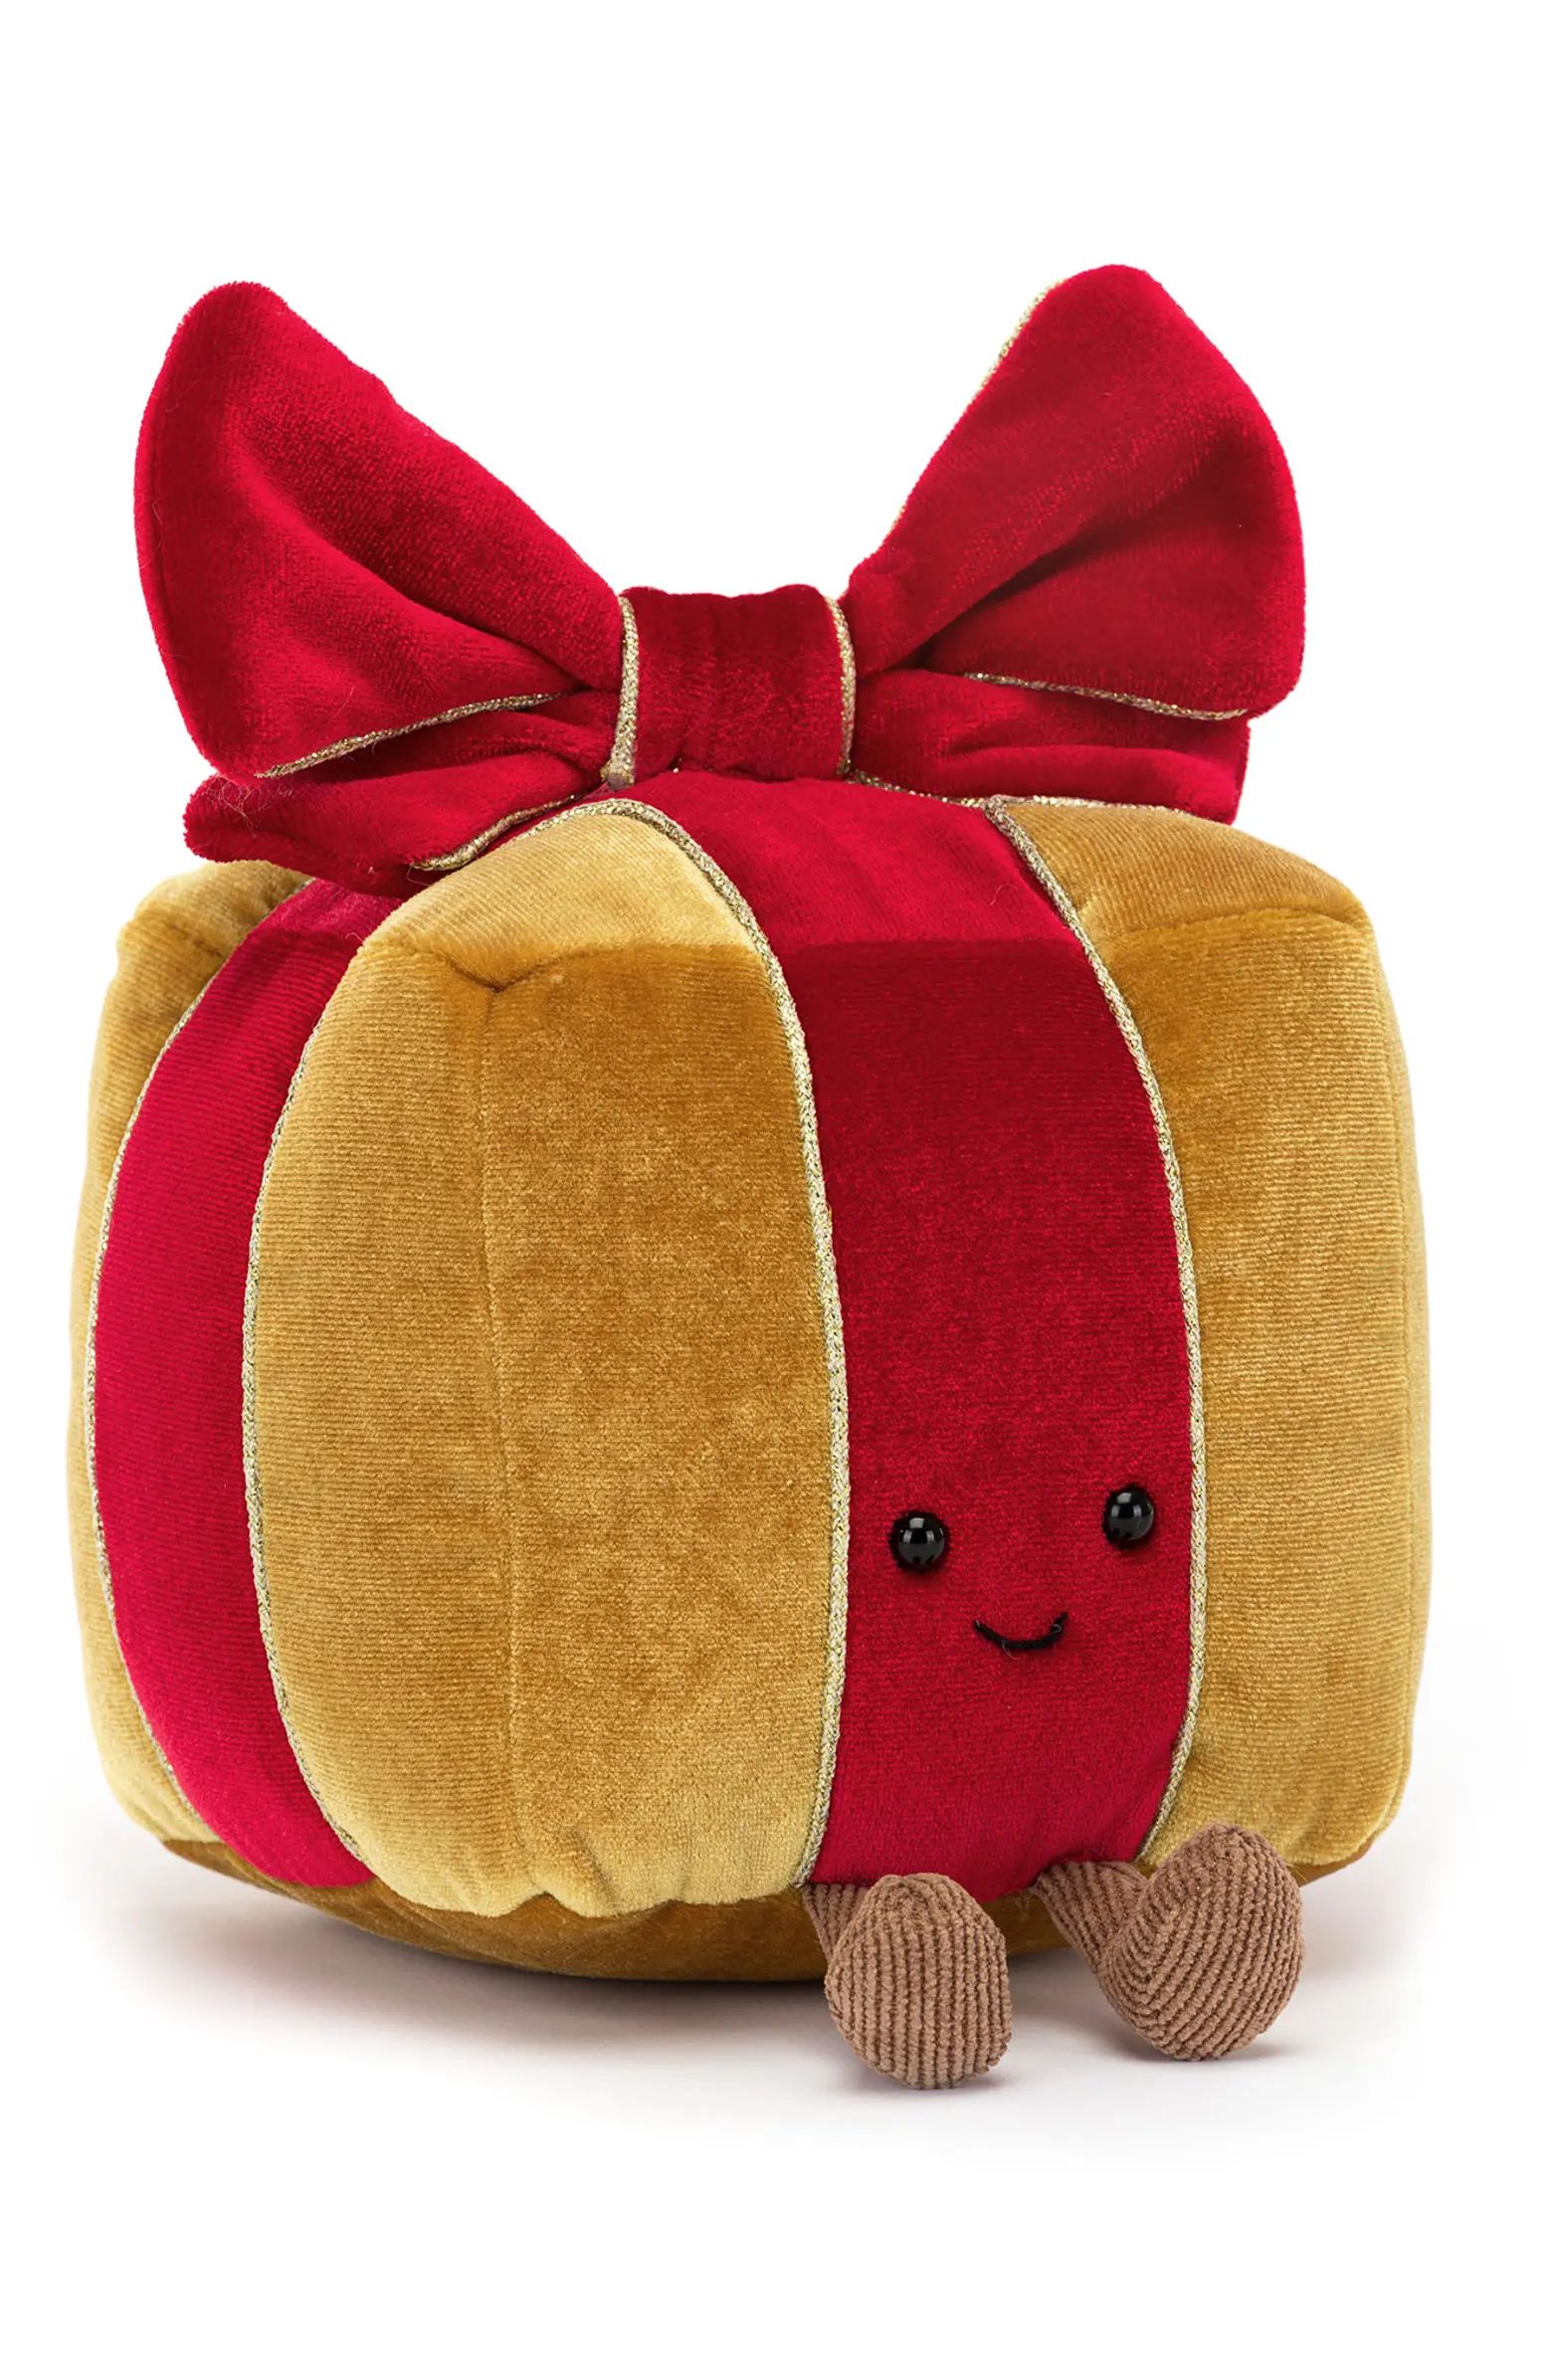 Jellycat Amuseable Present Plush Toy | Nordstrom | Nordstrom